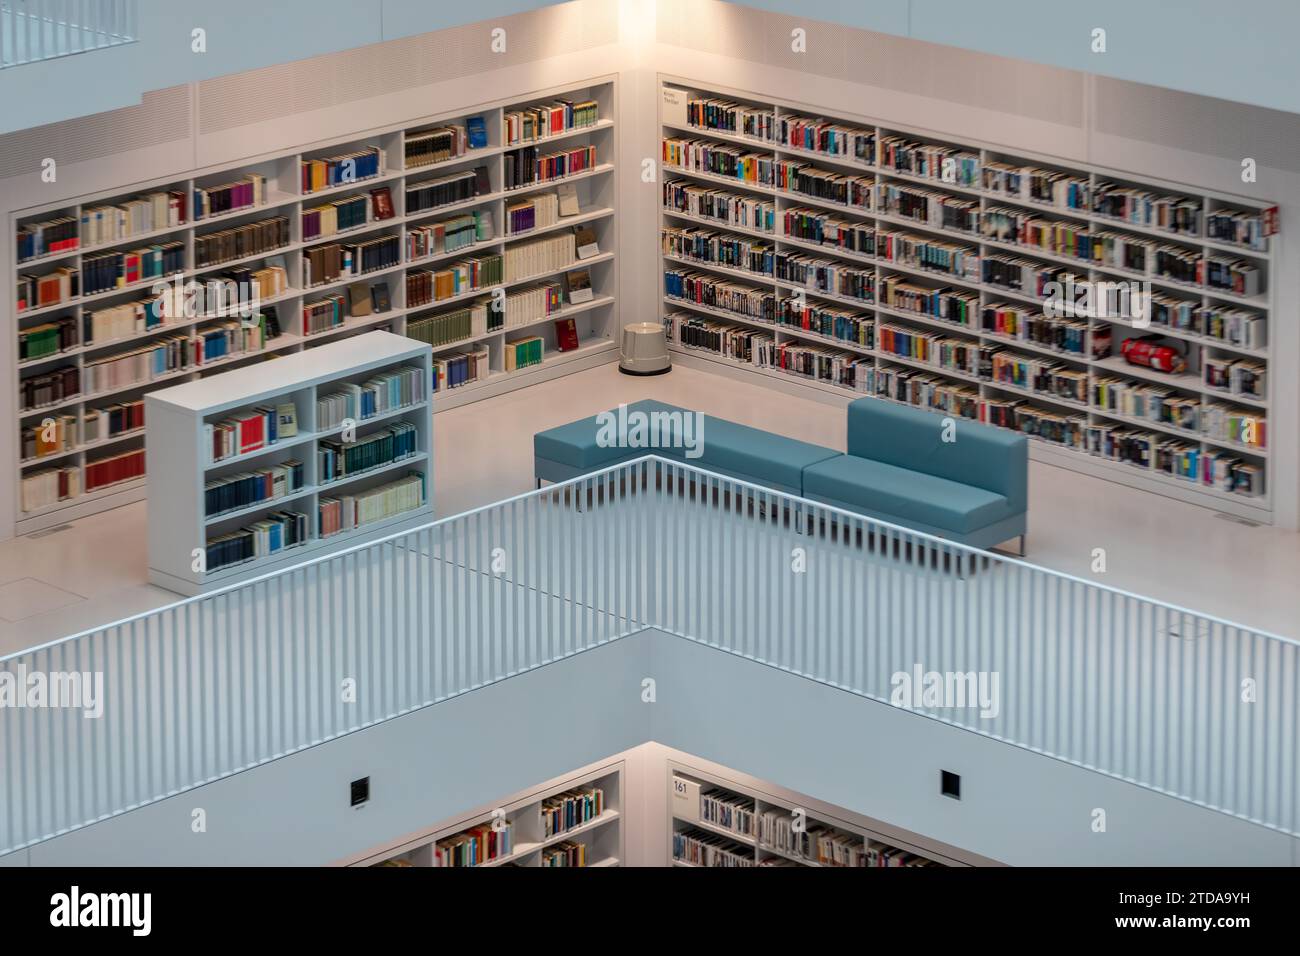 Exploring the Beauty of Stuttgart's Public City Library: Interior Architecture and Learning Resources Stock Photo